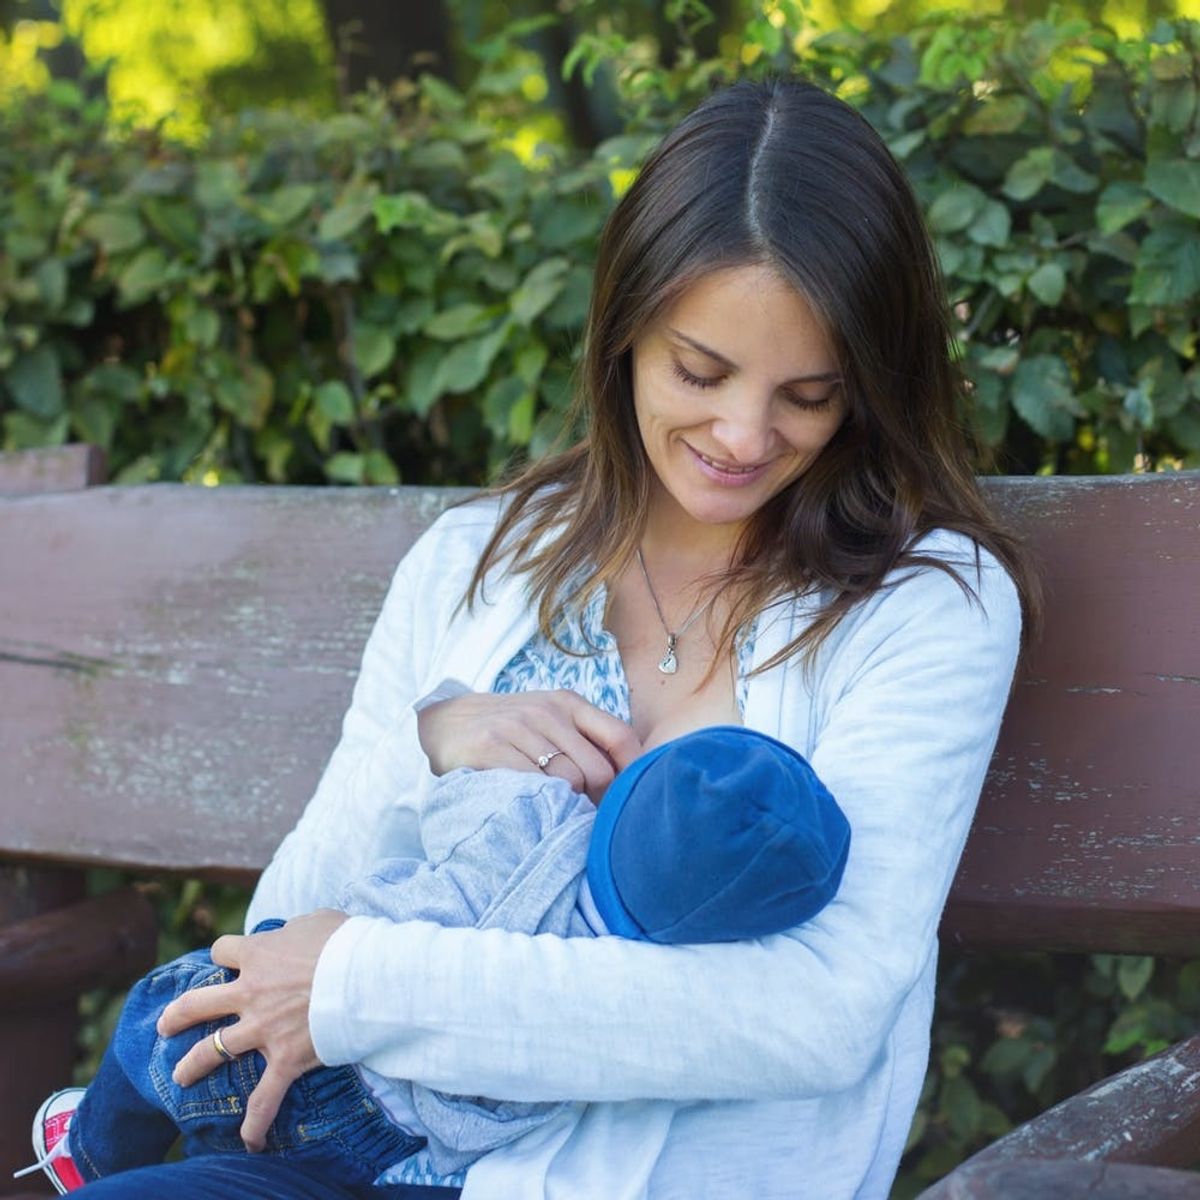 6 Common Myths About Breastfeeding, Debunked